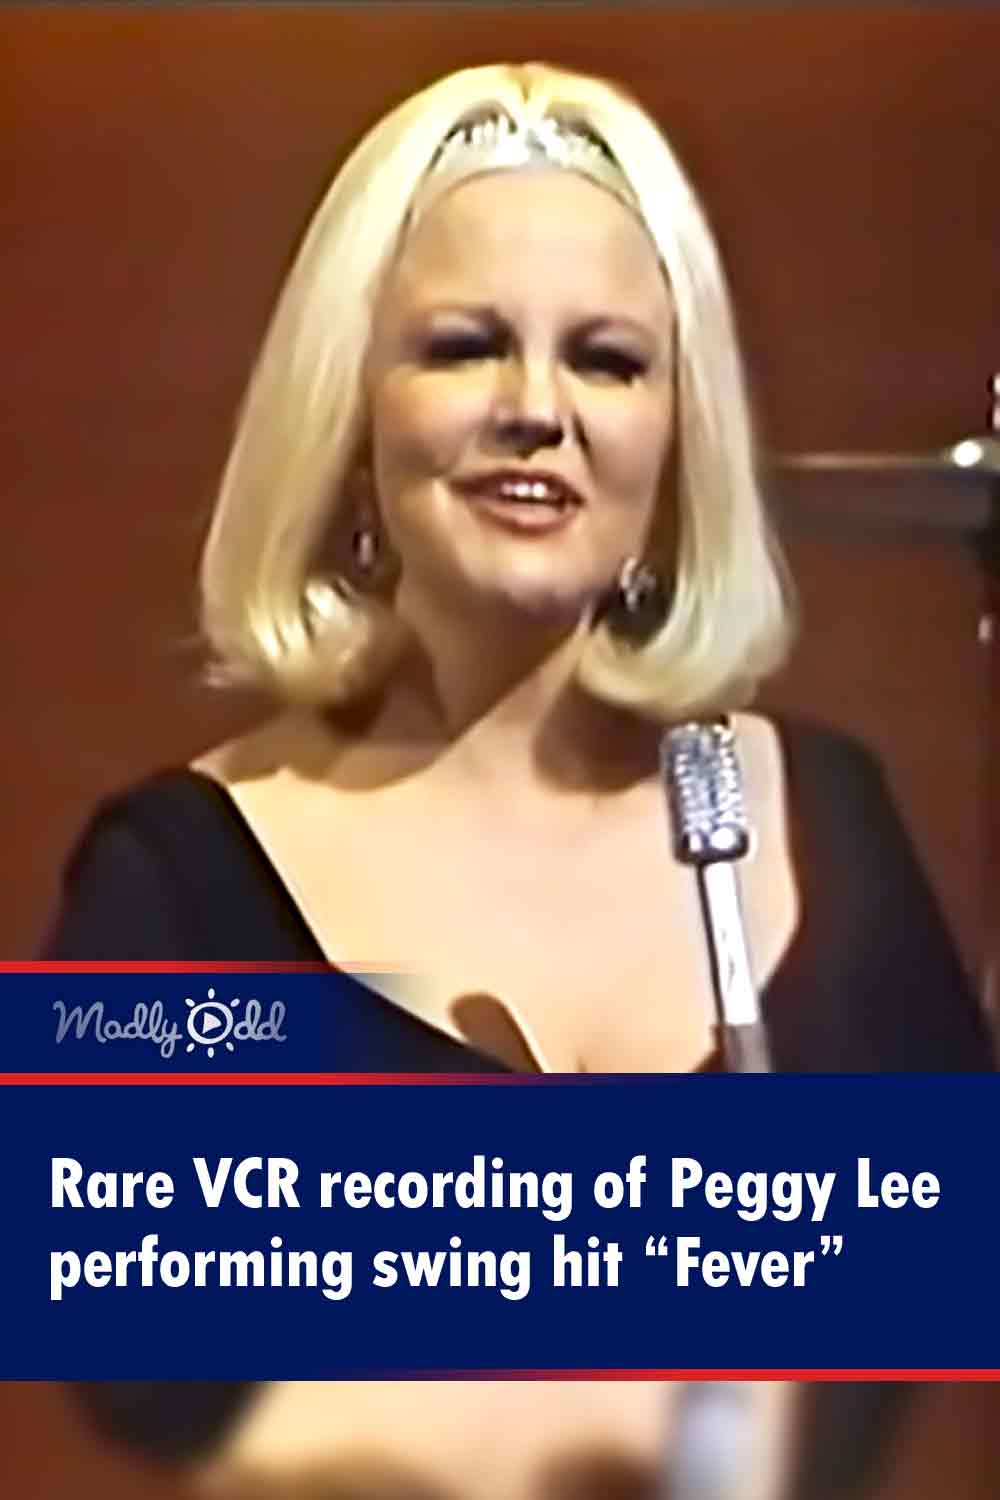 Rare VCR recording of Peggy Lee performing swing hit “Fever”